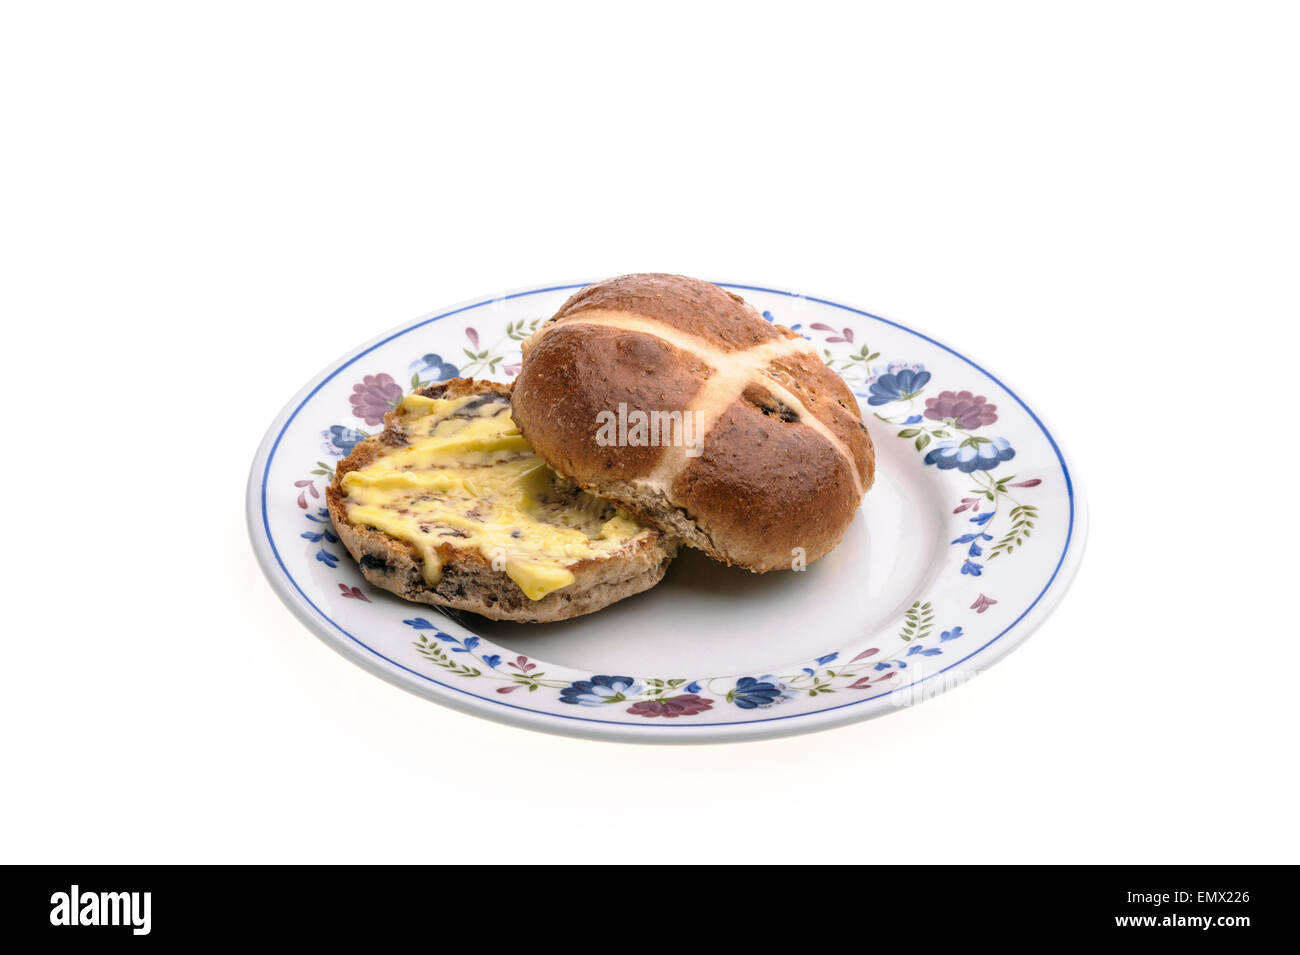 Hot cross bun on a round, decorated plate. Stock Photo